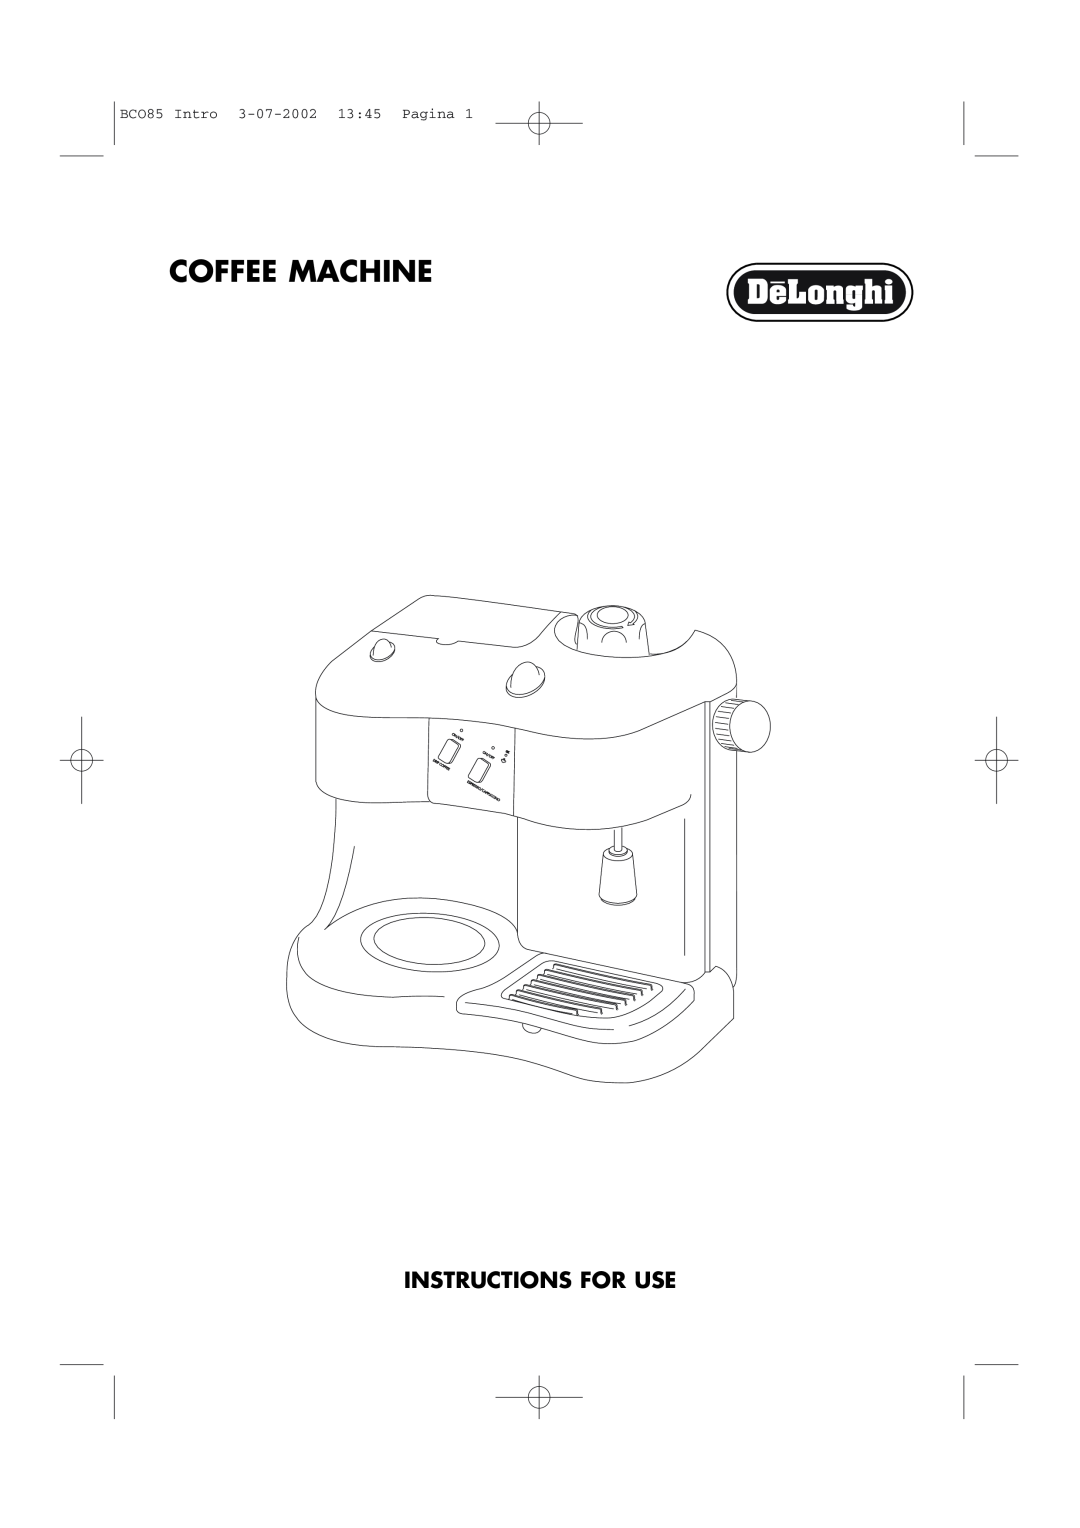 DeLonghi BCO85 GB manual Coffee Machine, Instructions For Use, BCO85 Intro 3-07-200213 45 Pagina 